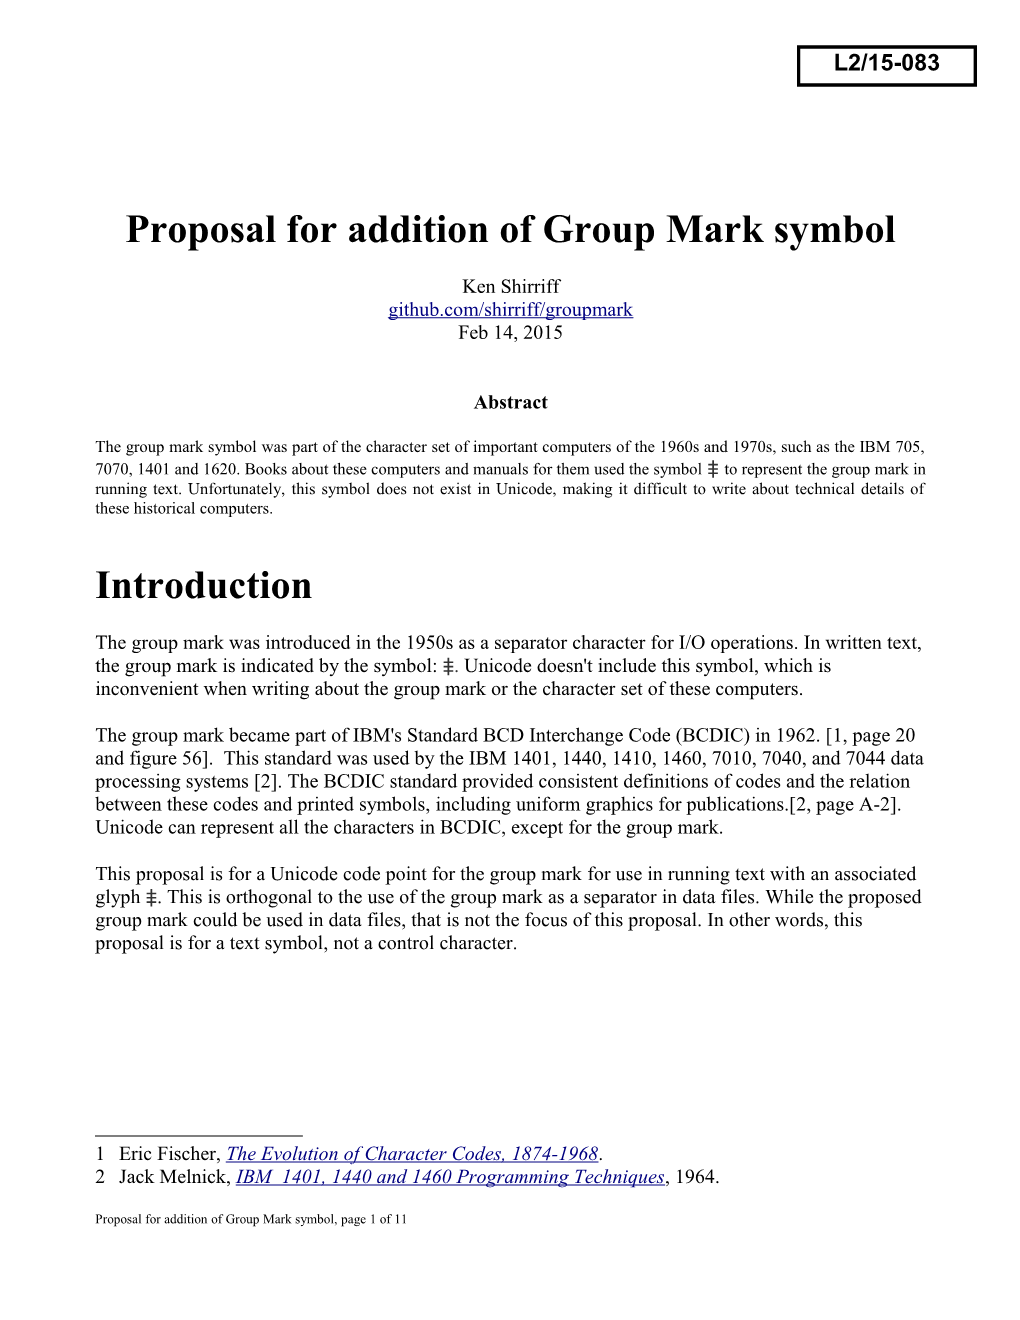 Proposal for Addition of Group Mark Symbol Introduction